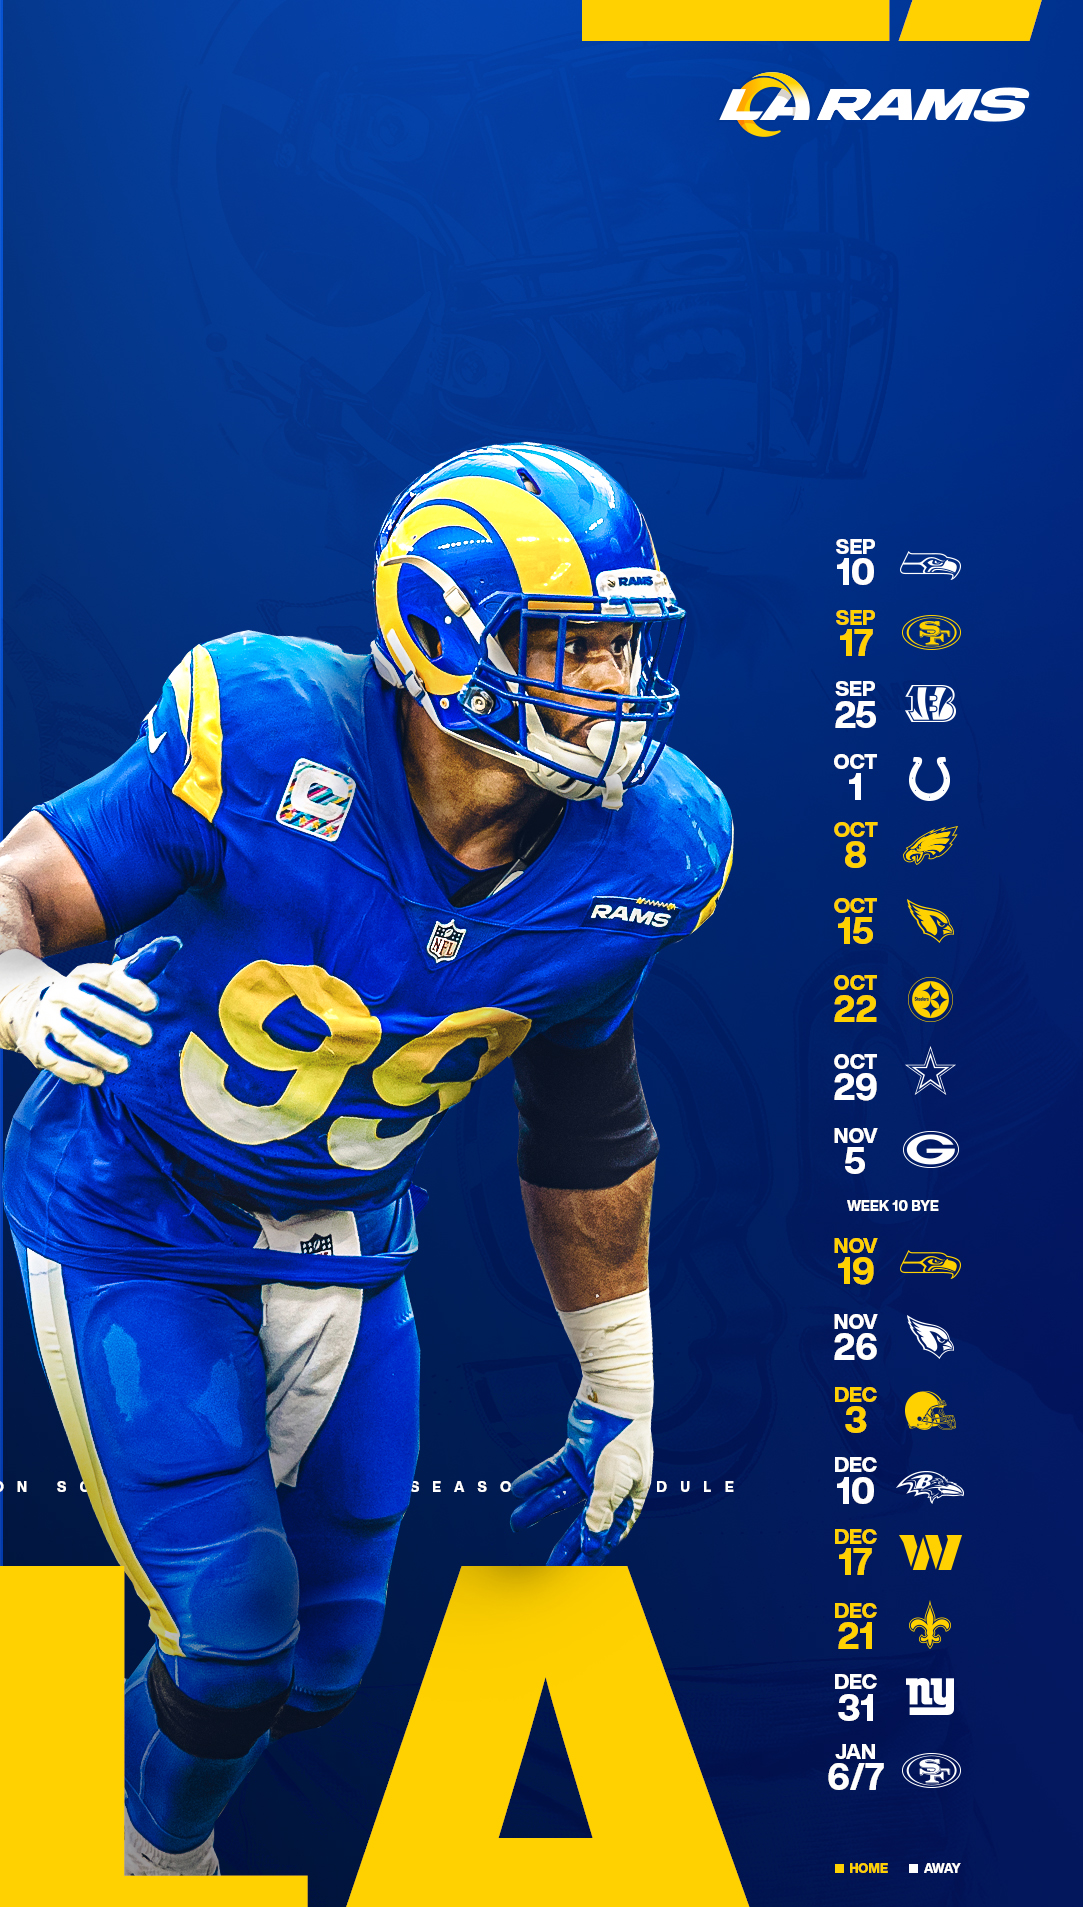 NFL Wallpapers